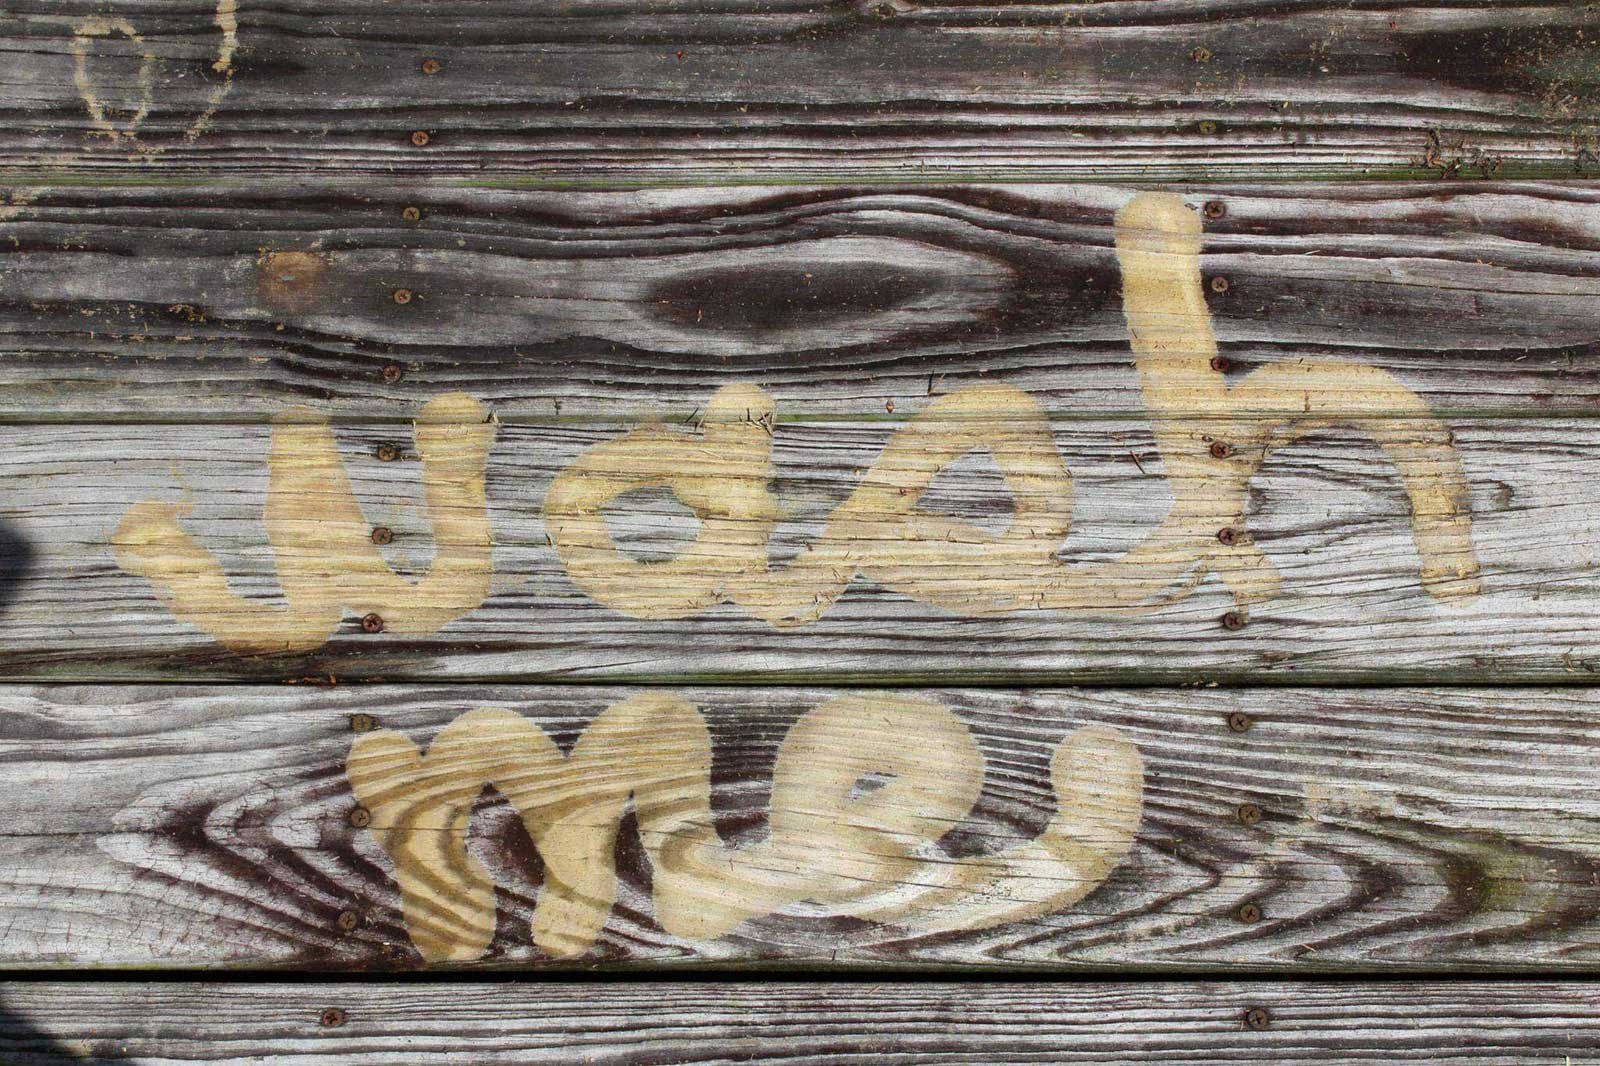 The words “wash me” pressure washed into an old, weathered deck